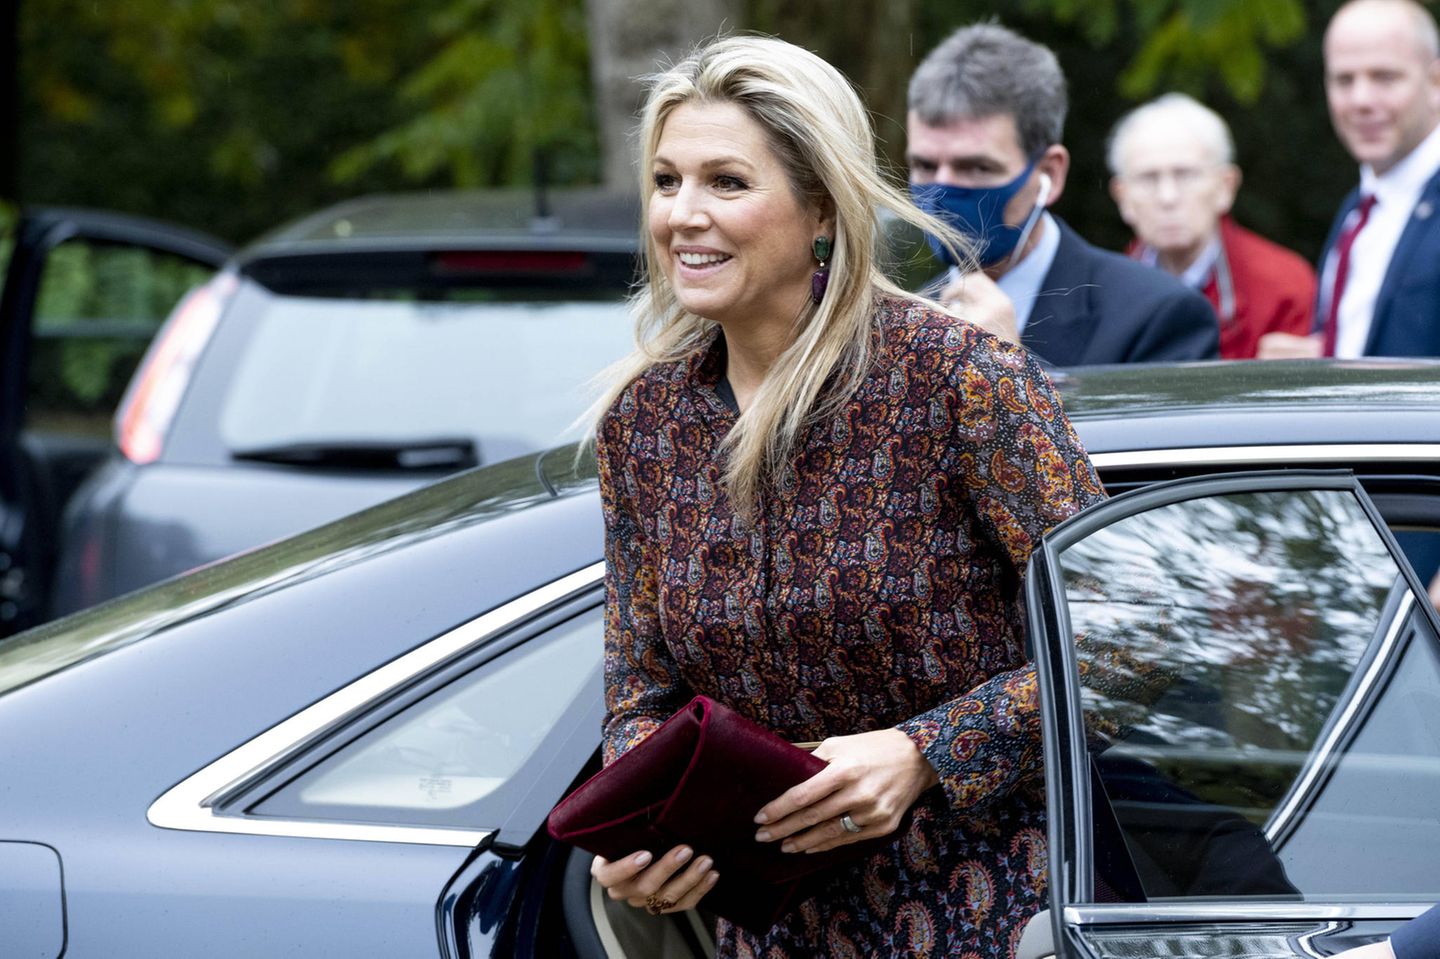 Queen Máxima: in a paisley dress "loading =" lazy